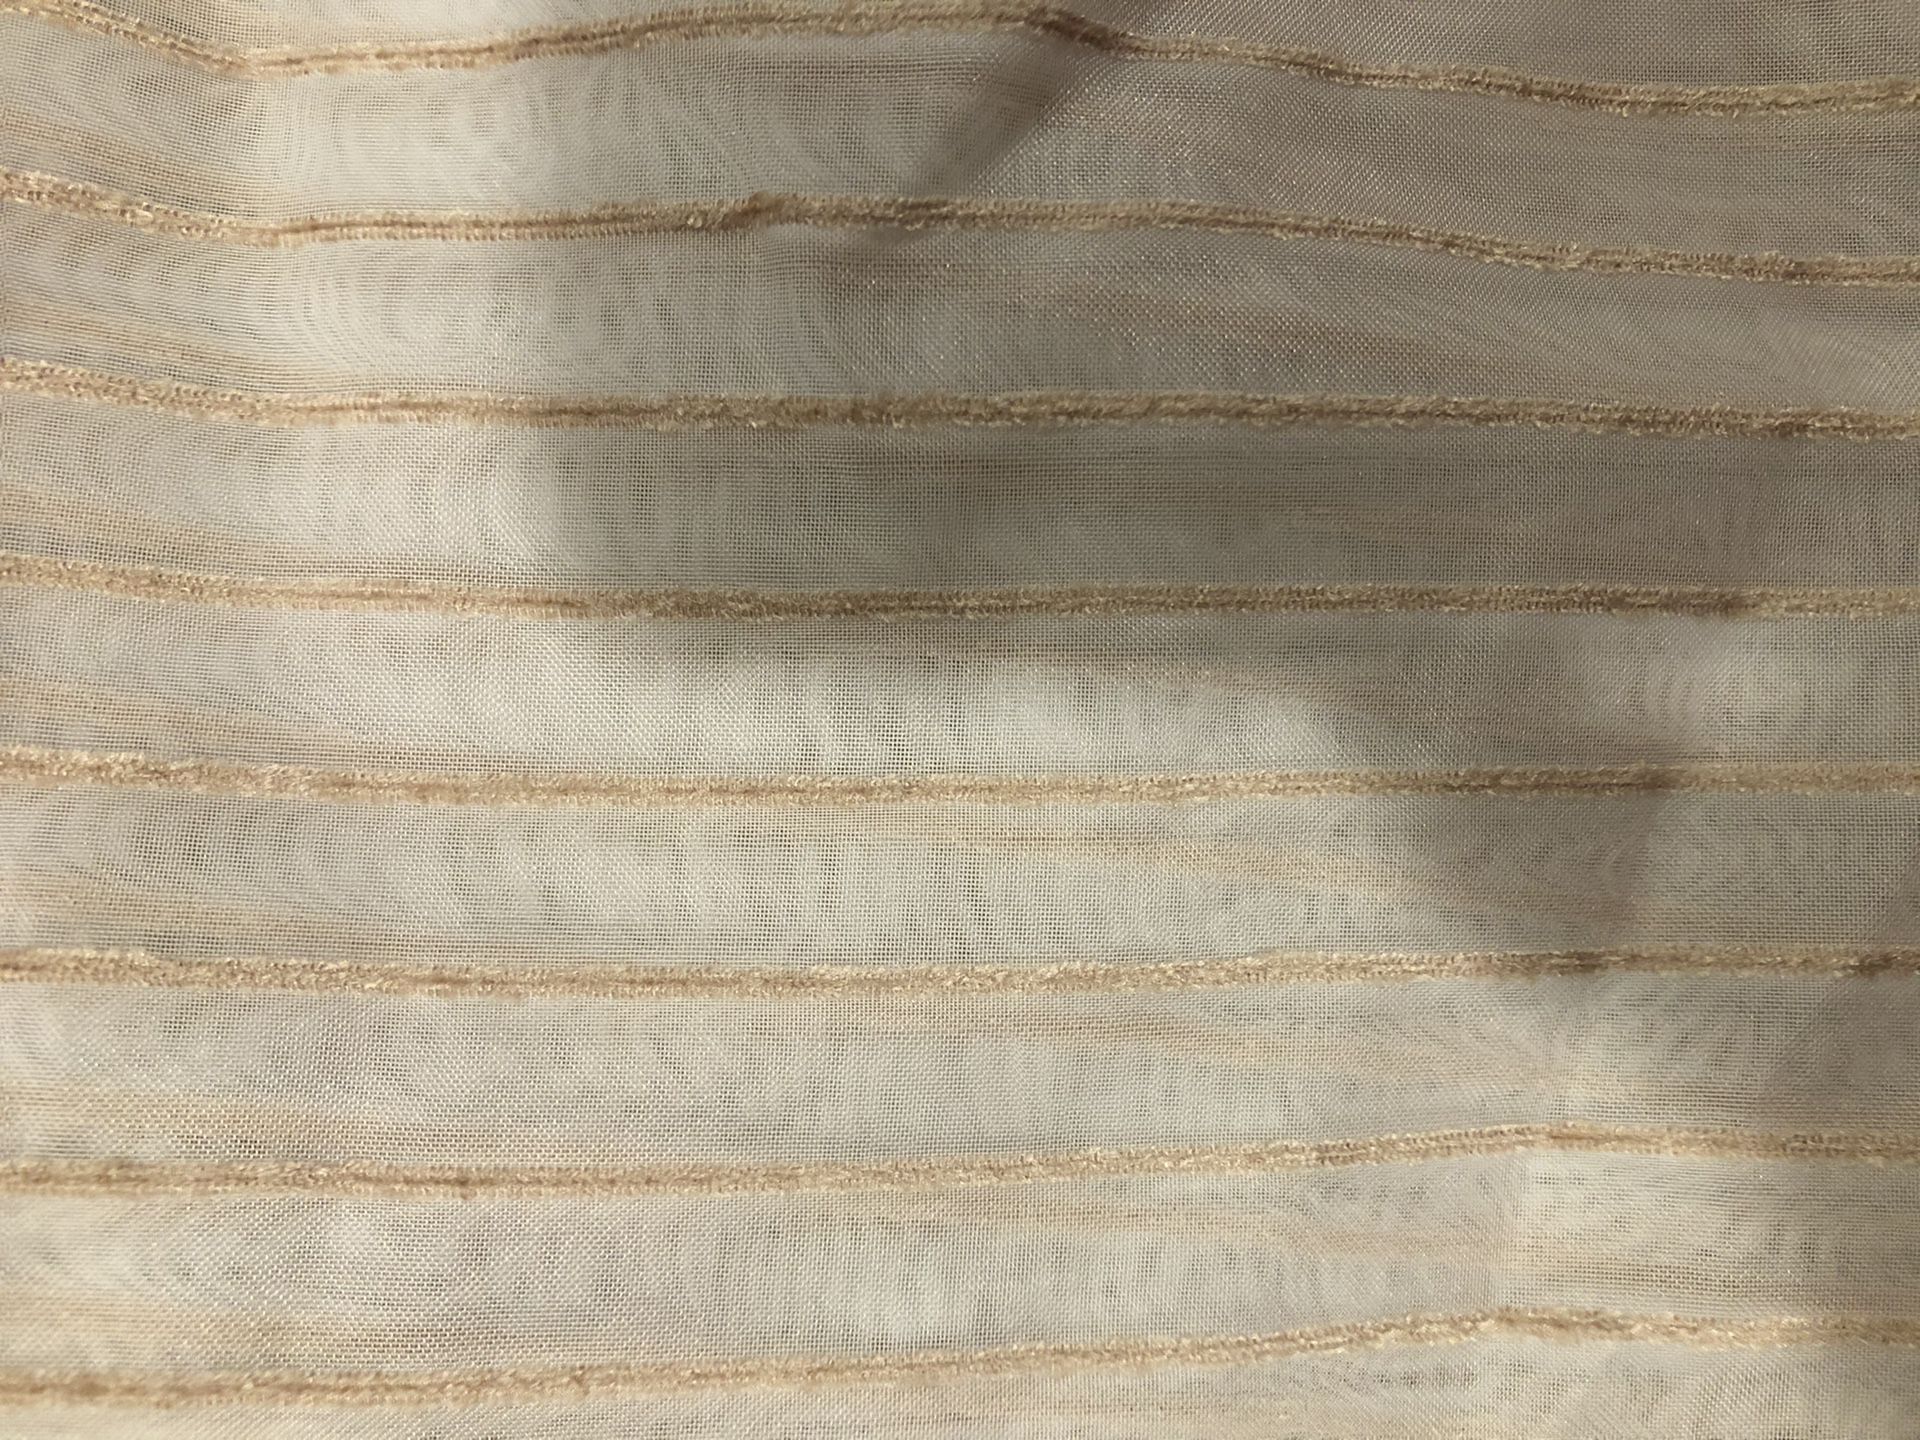 Sheer upholstery fabric with textured tan stripes.